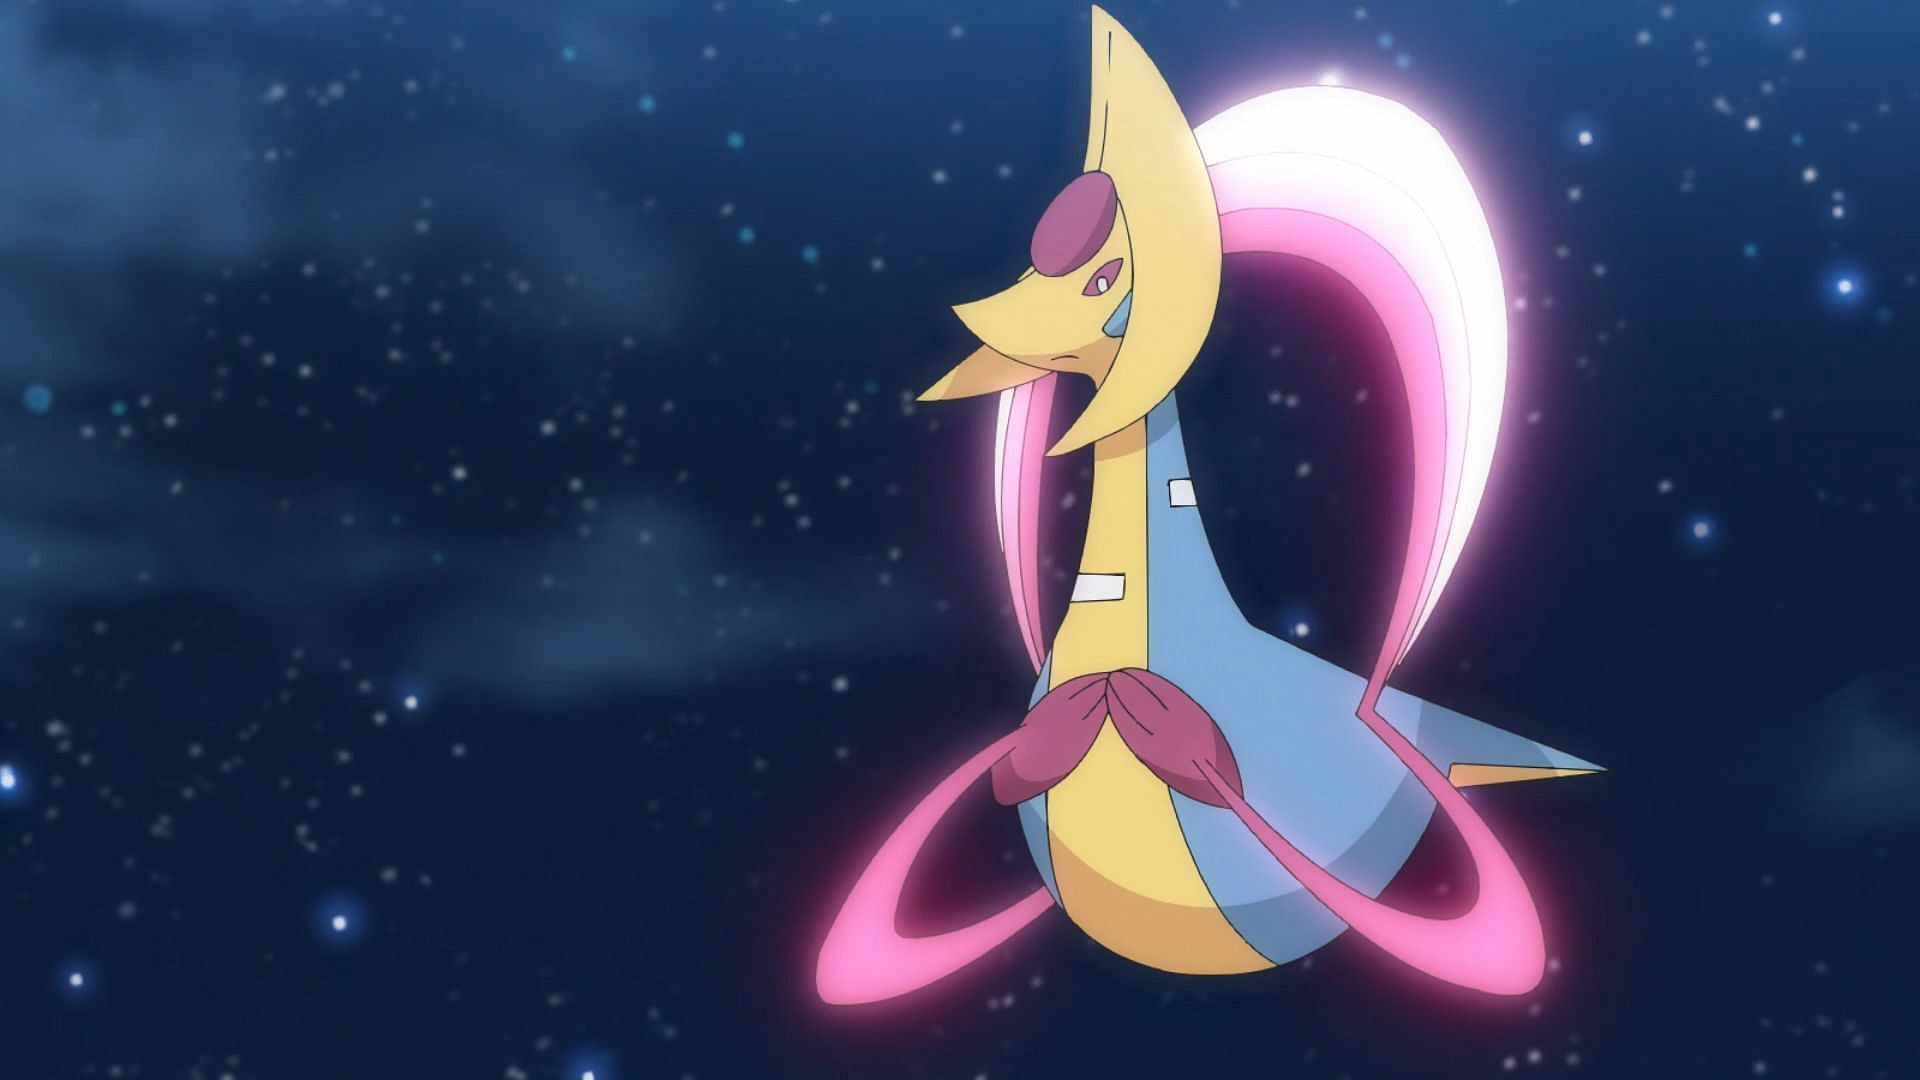 Cresselia is one of the bulkiest options in the Ultra League (Image via The Pokemon Company)